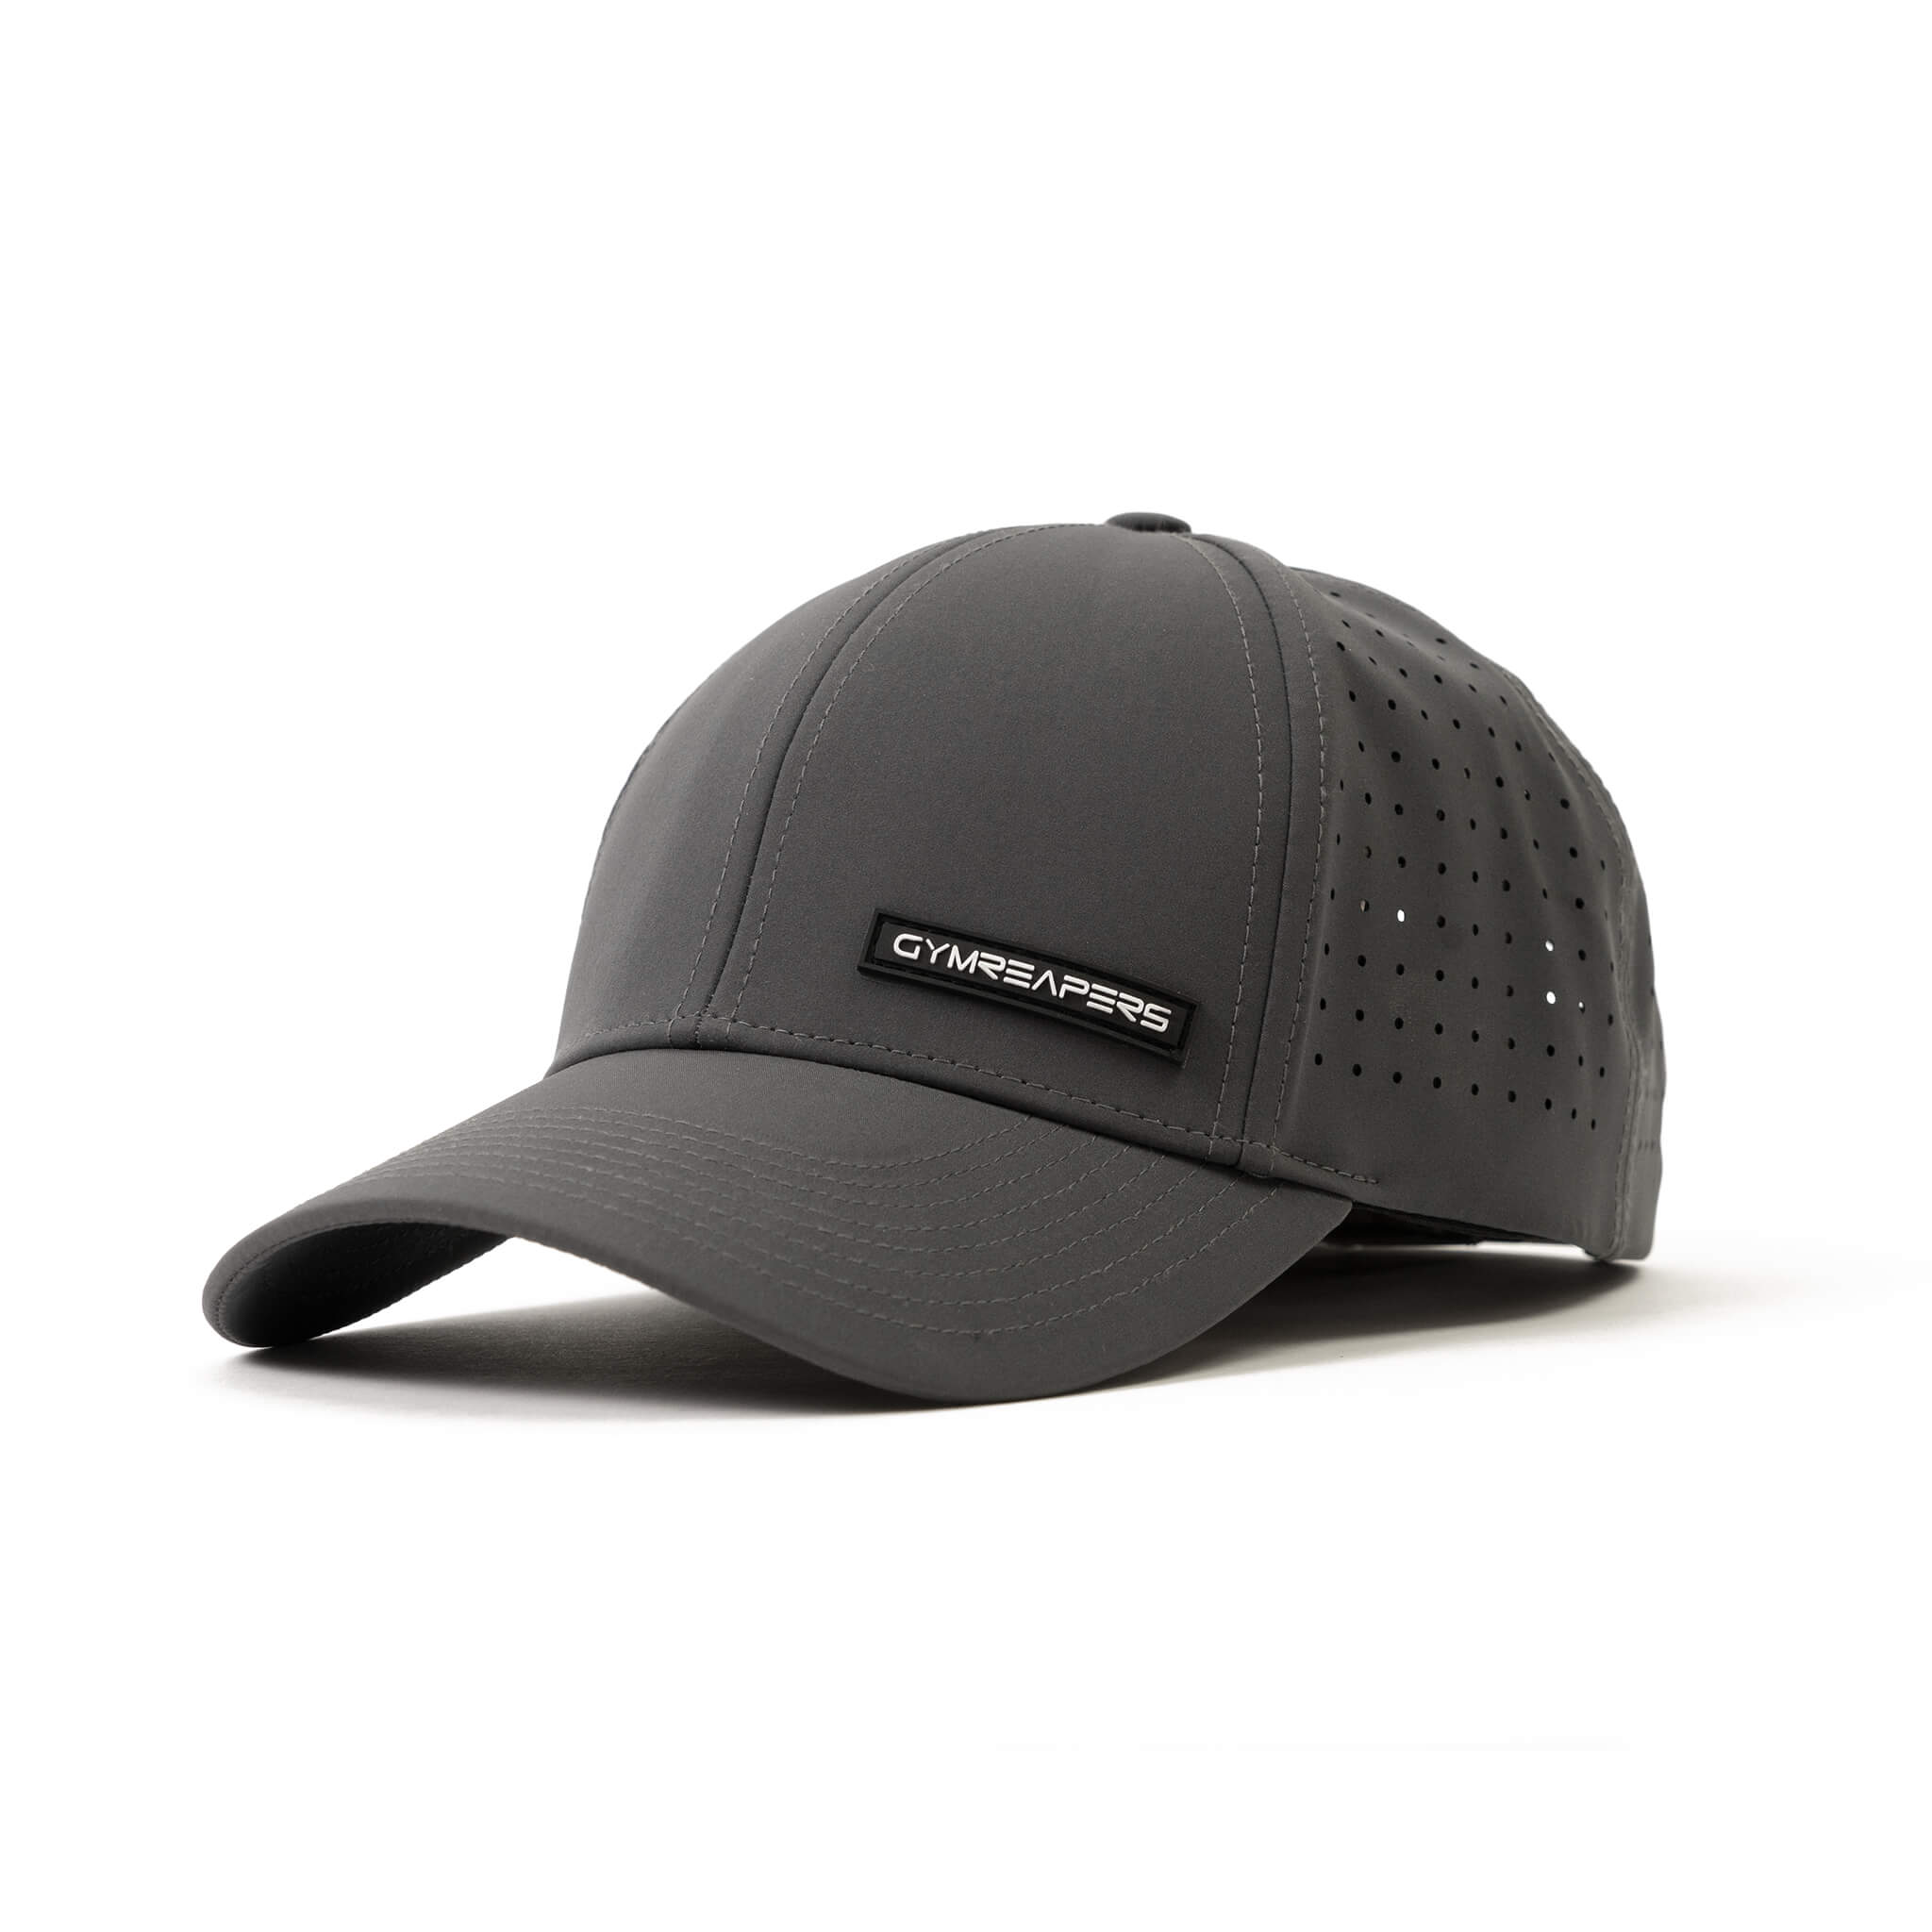 gymreapers hybrid performance hat